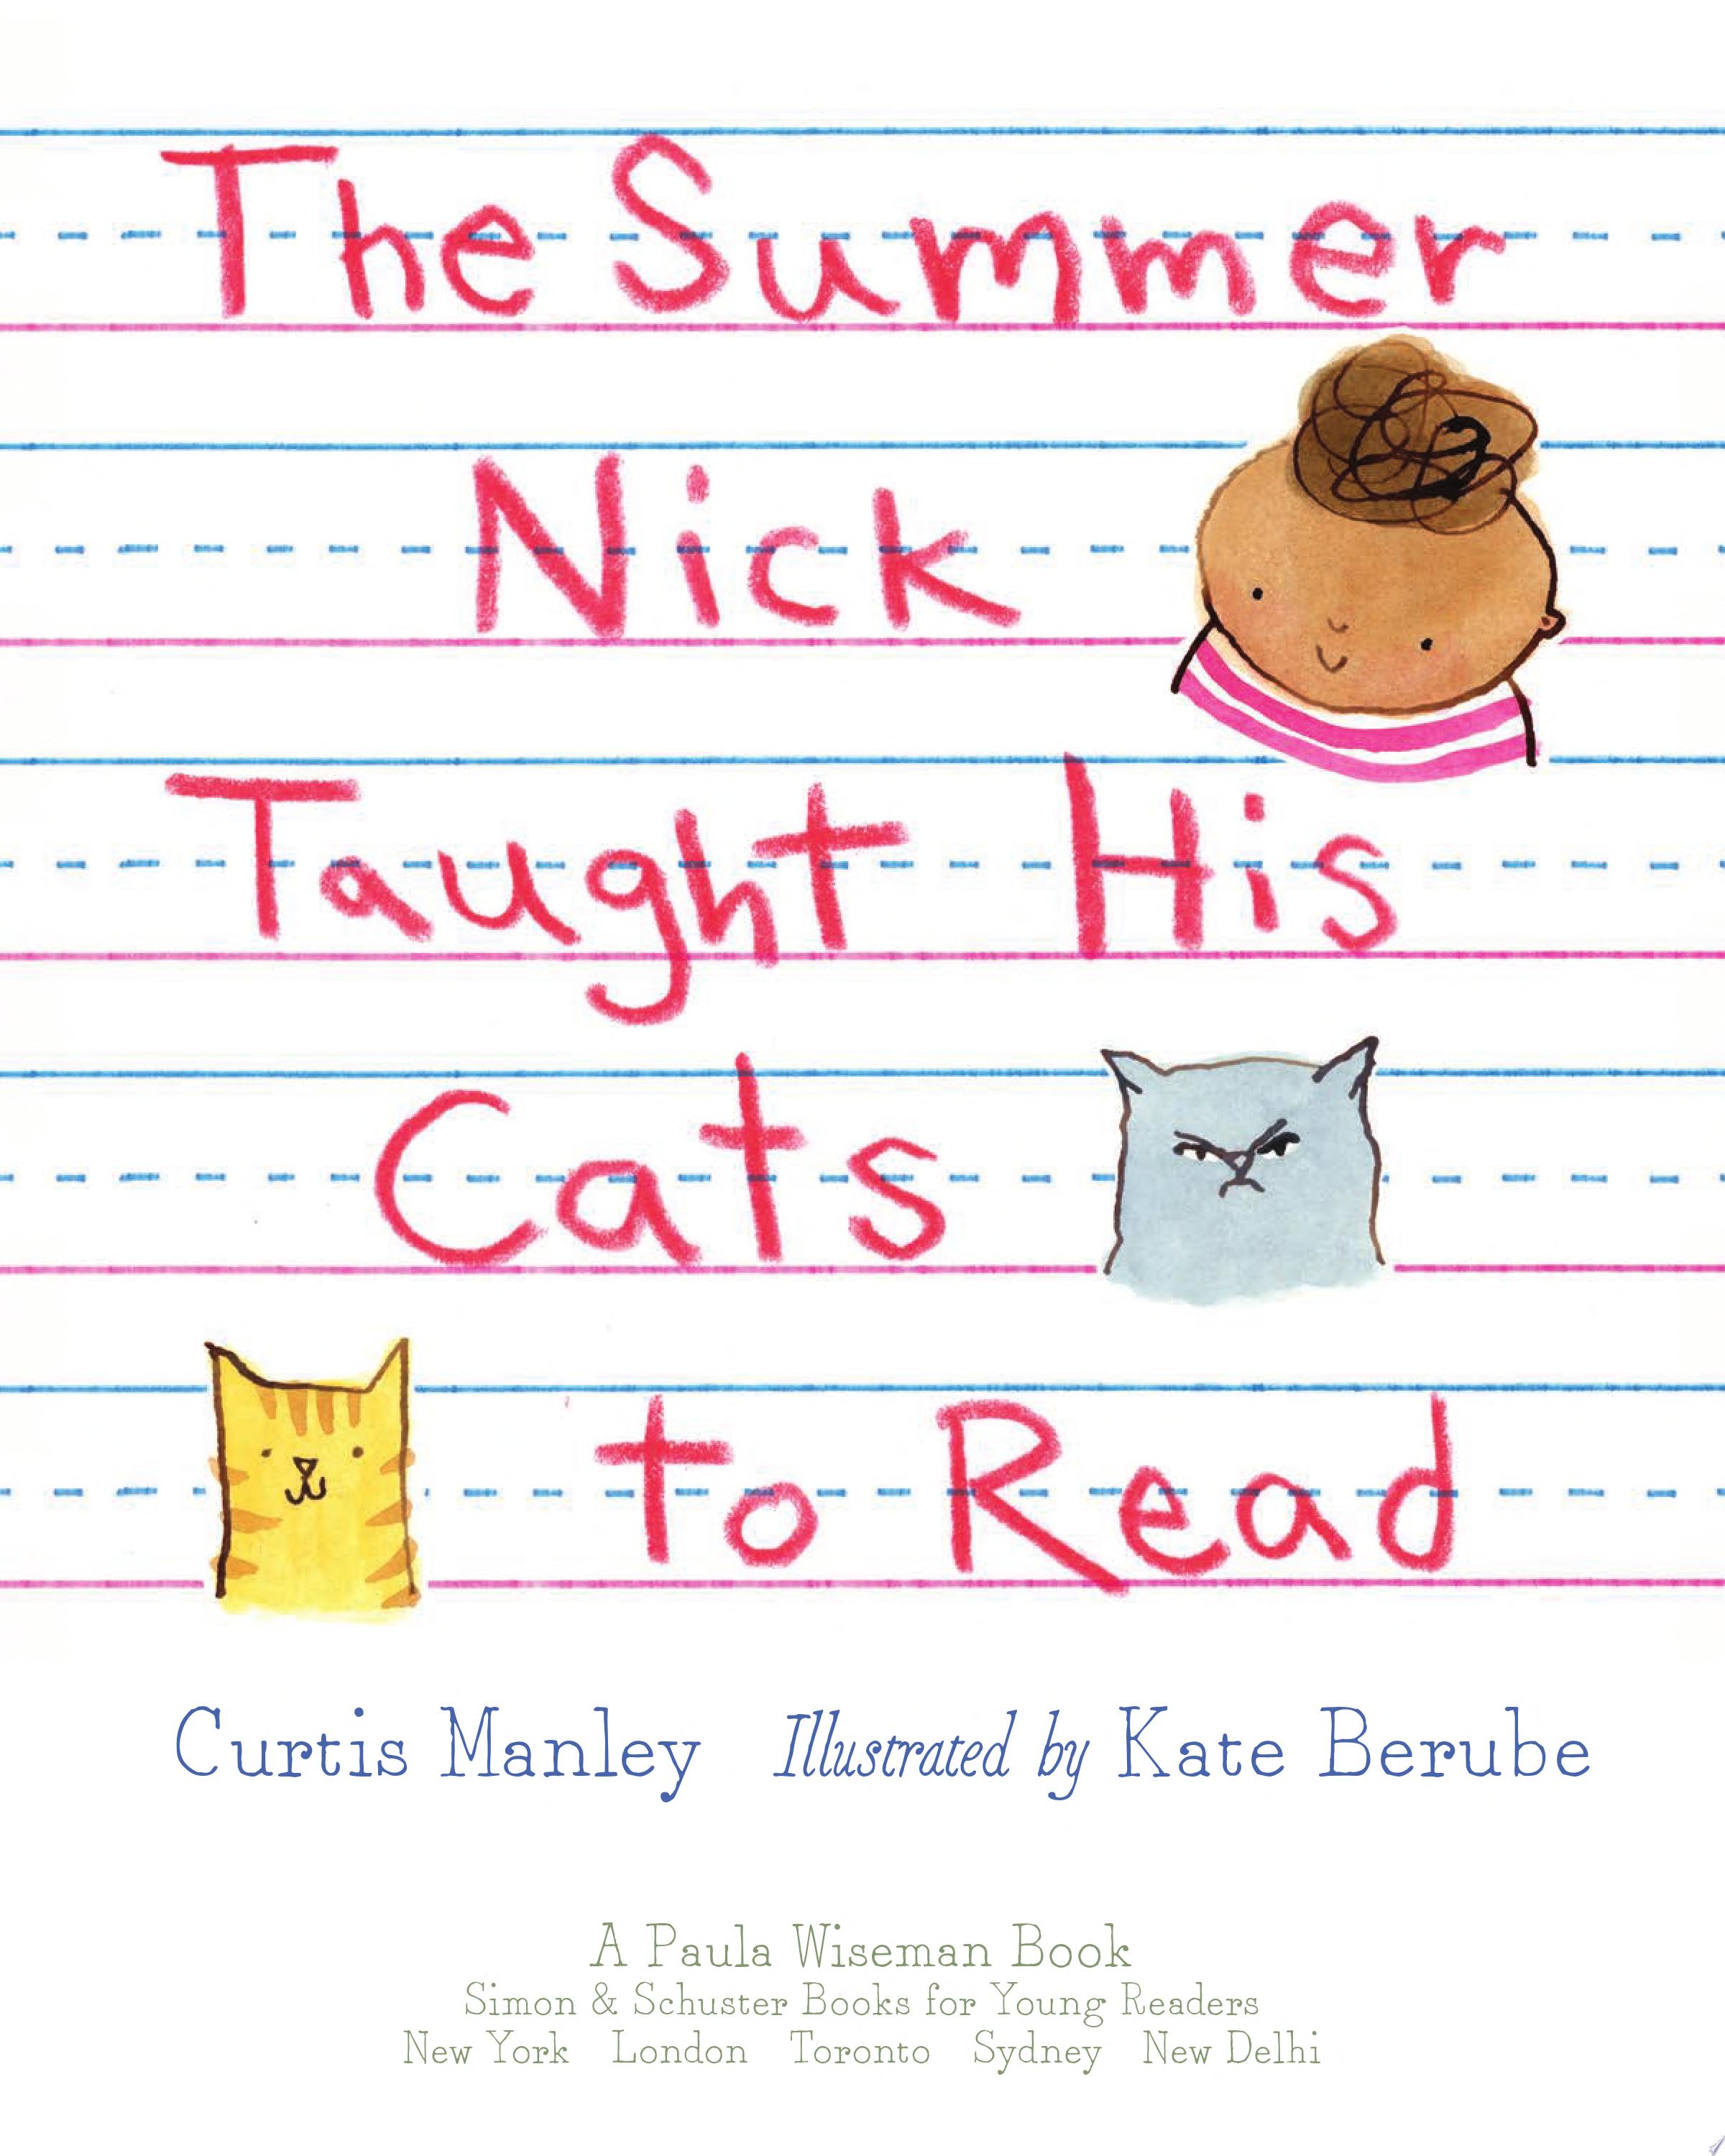 Image for "The Summer Nick Taught His Cats to Read"